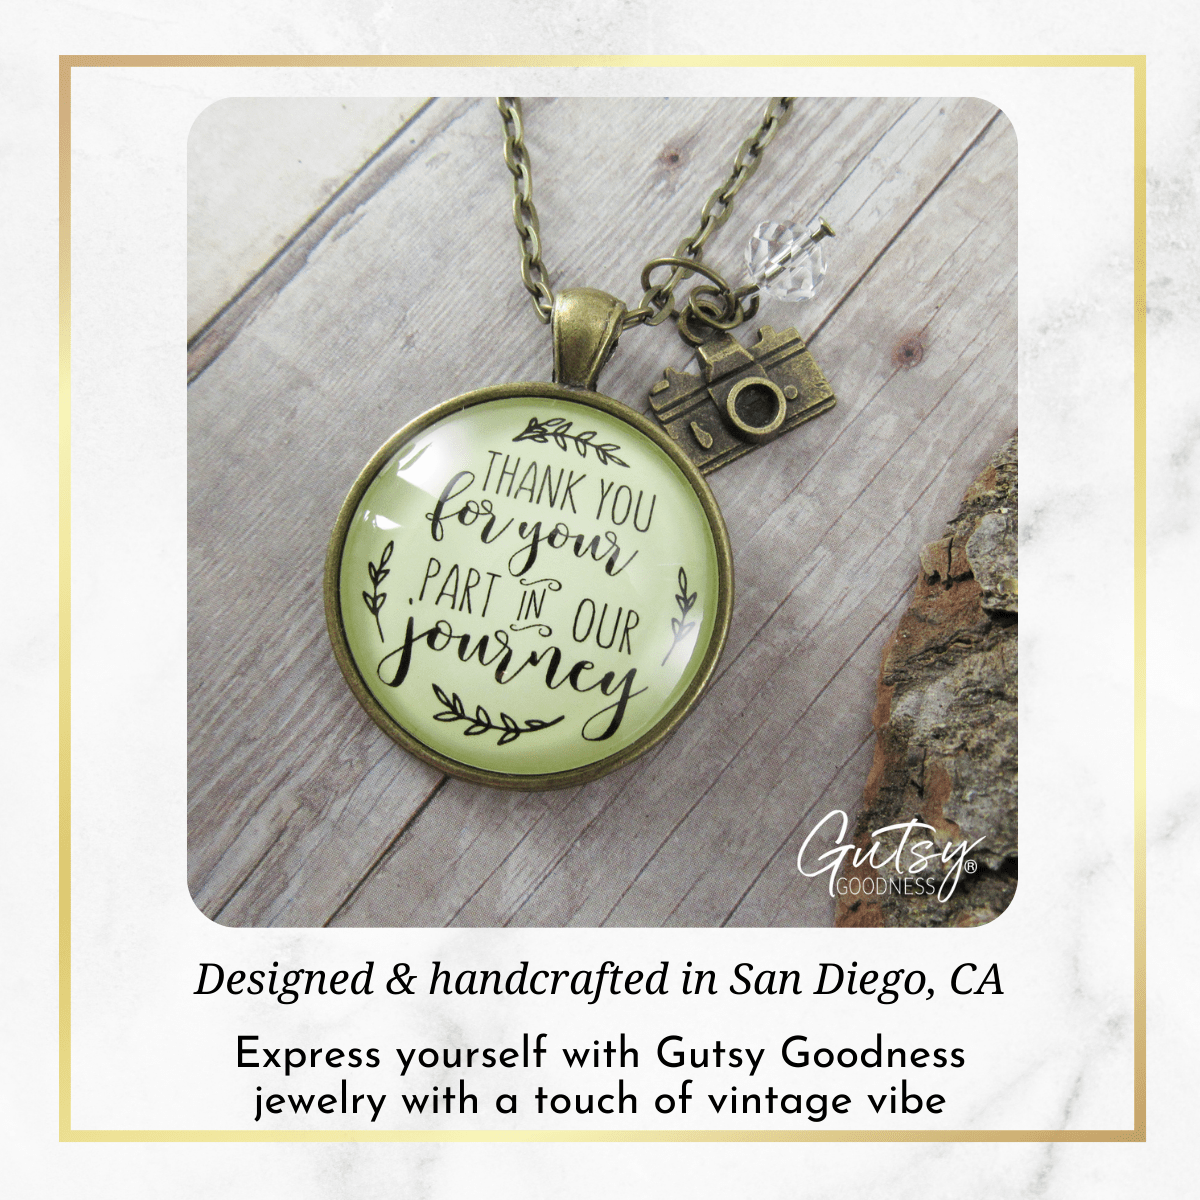 Gutsy Goodness Wedding Photographer Gift Necklace Thank You for Part Camera Charm - Gutsy Goodness Handmade Jewelry;Wedding Photographer Gift Necklace Thank You For Part Camera Charm - Gutsy Goodness Handmade Jewelry Gifts